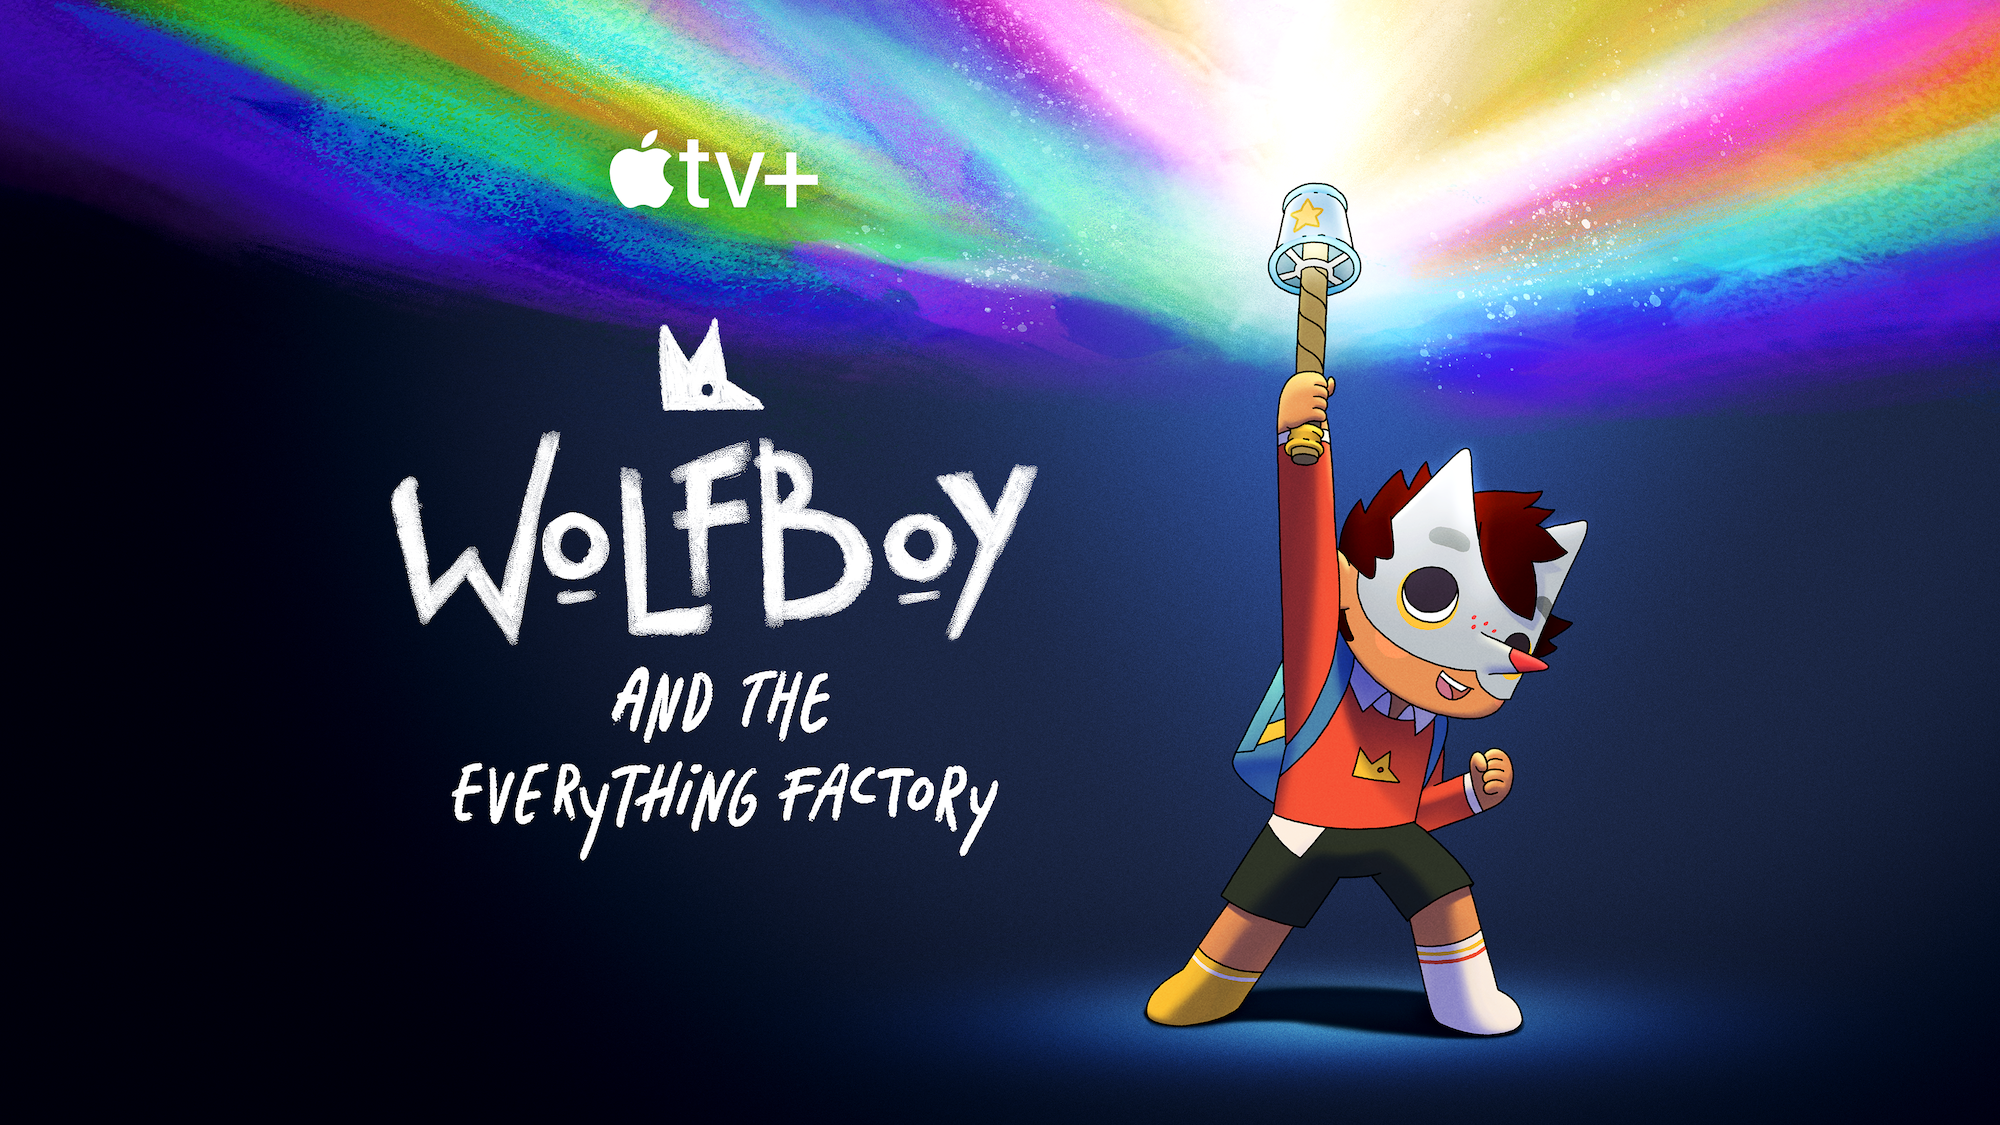 Wolfboy and the Everything Factory from Apple TV+